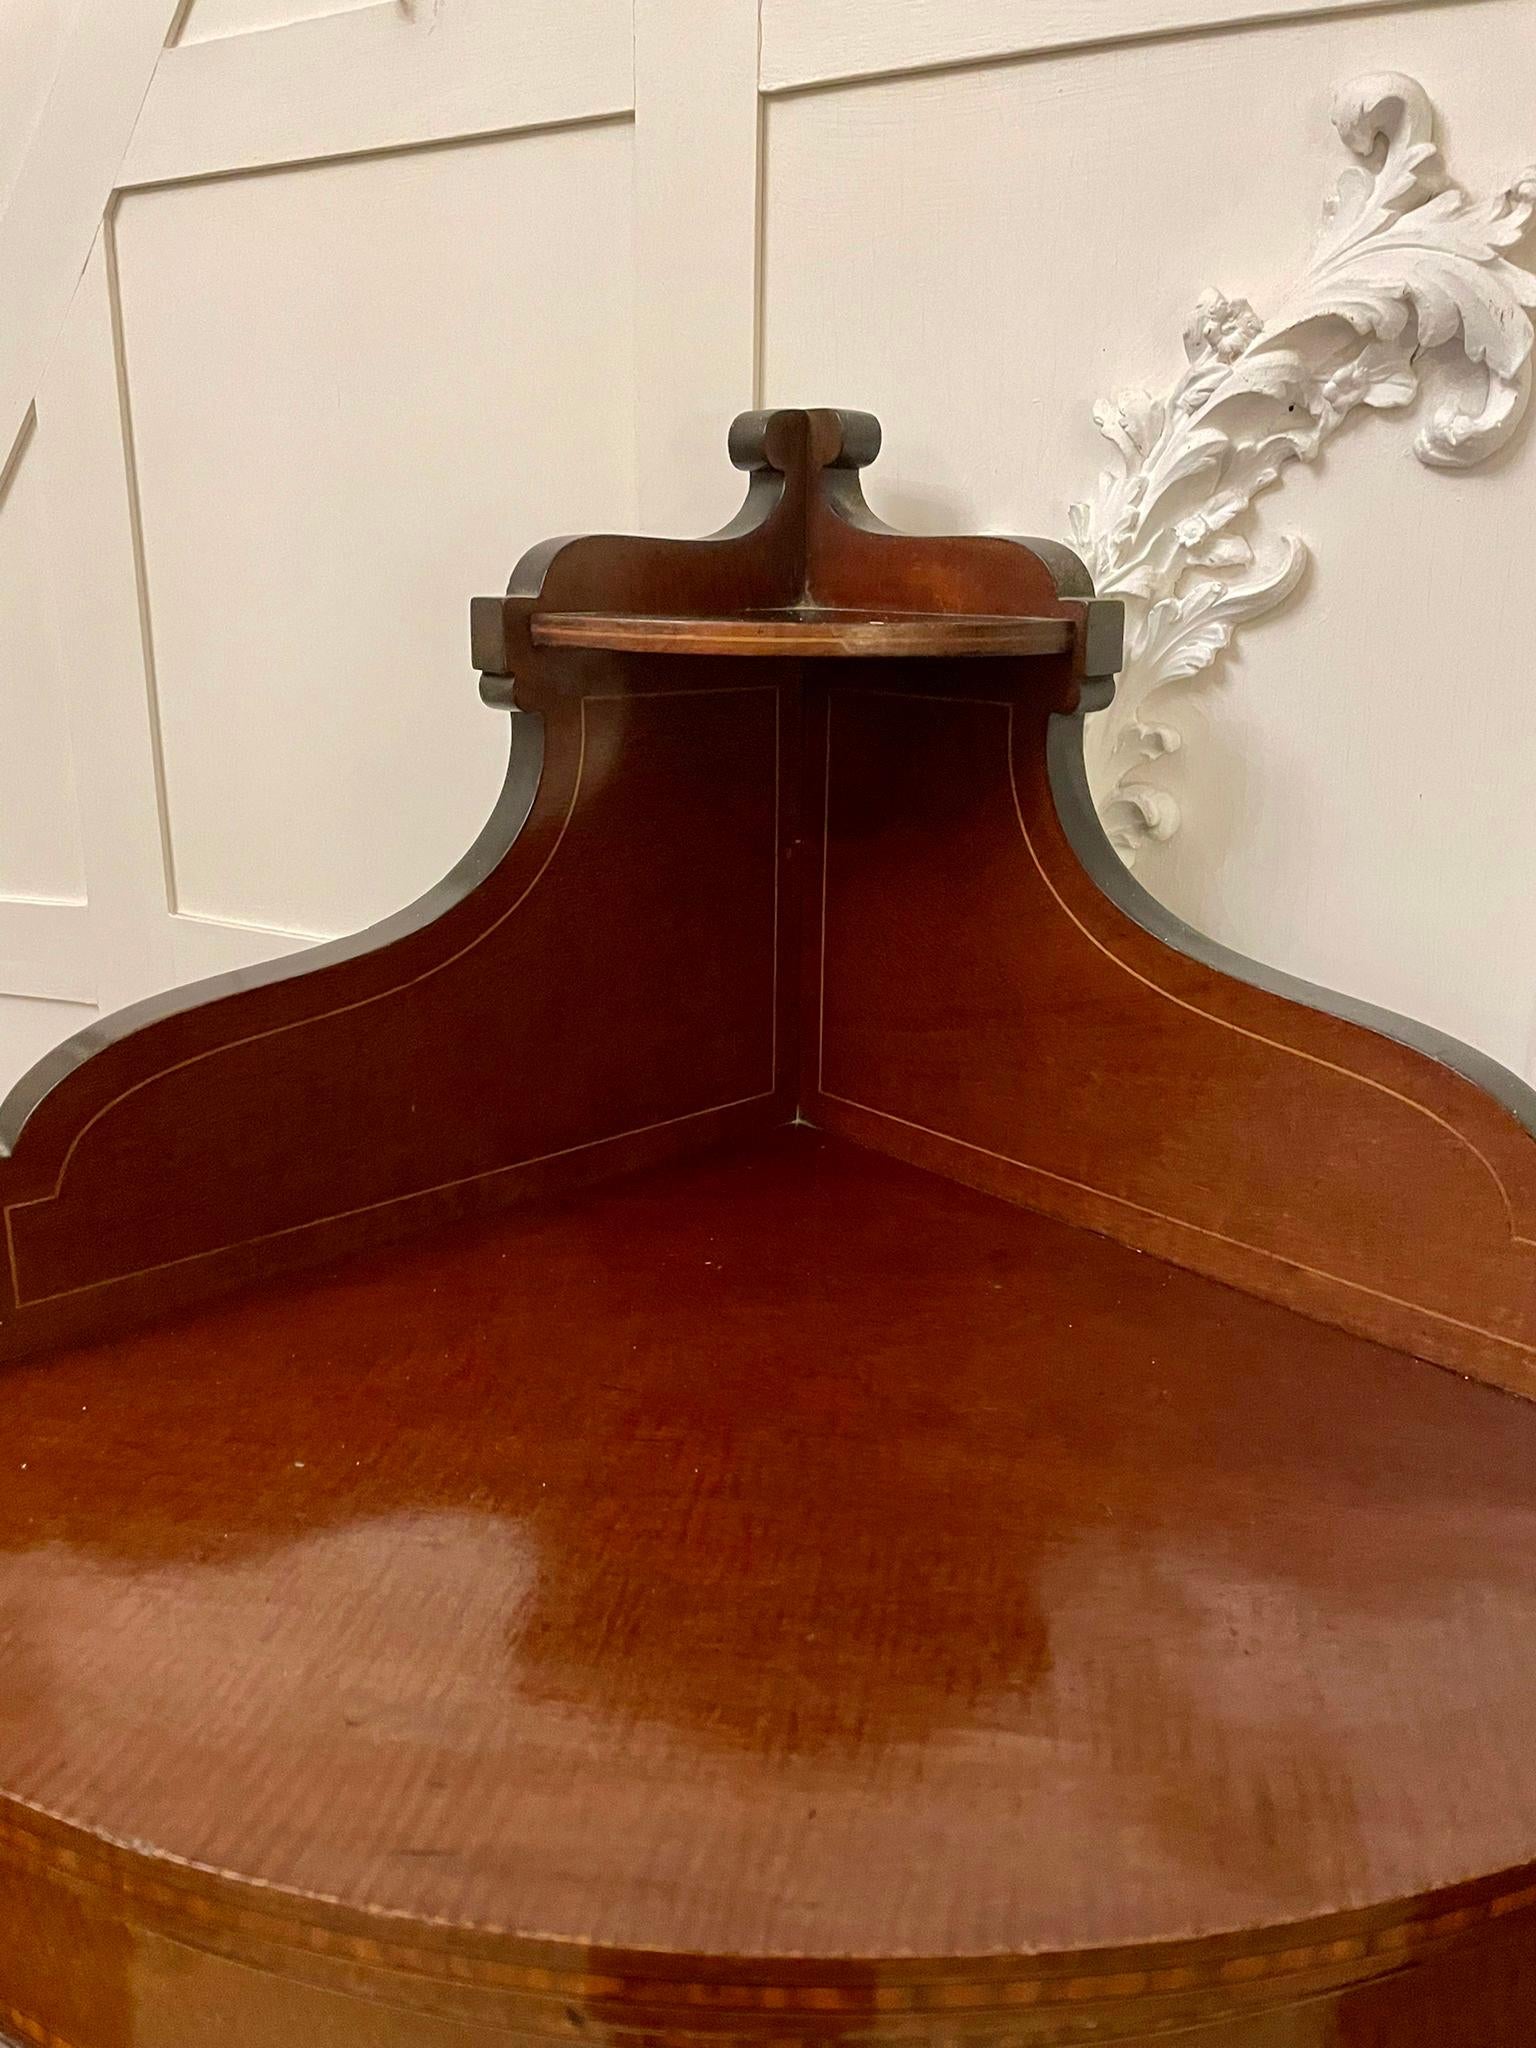 Antique Edwardian quality mahogany inlaid bow fronted corner display cabinet having a pretty shaped gallery top above a mahogany and satinwood inlaid bow fronted single glazed door opening to reveal a velvet lined shelf interior and standing on